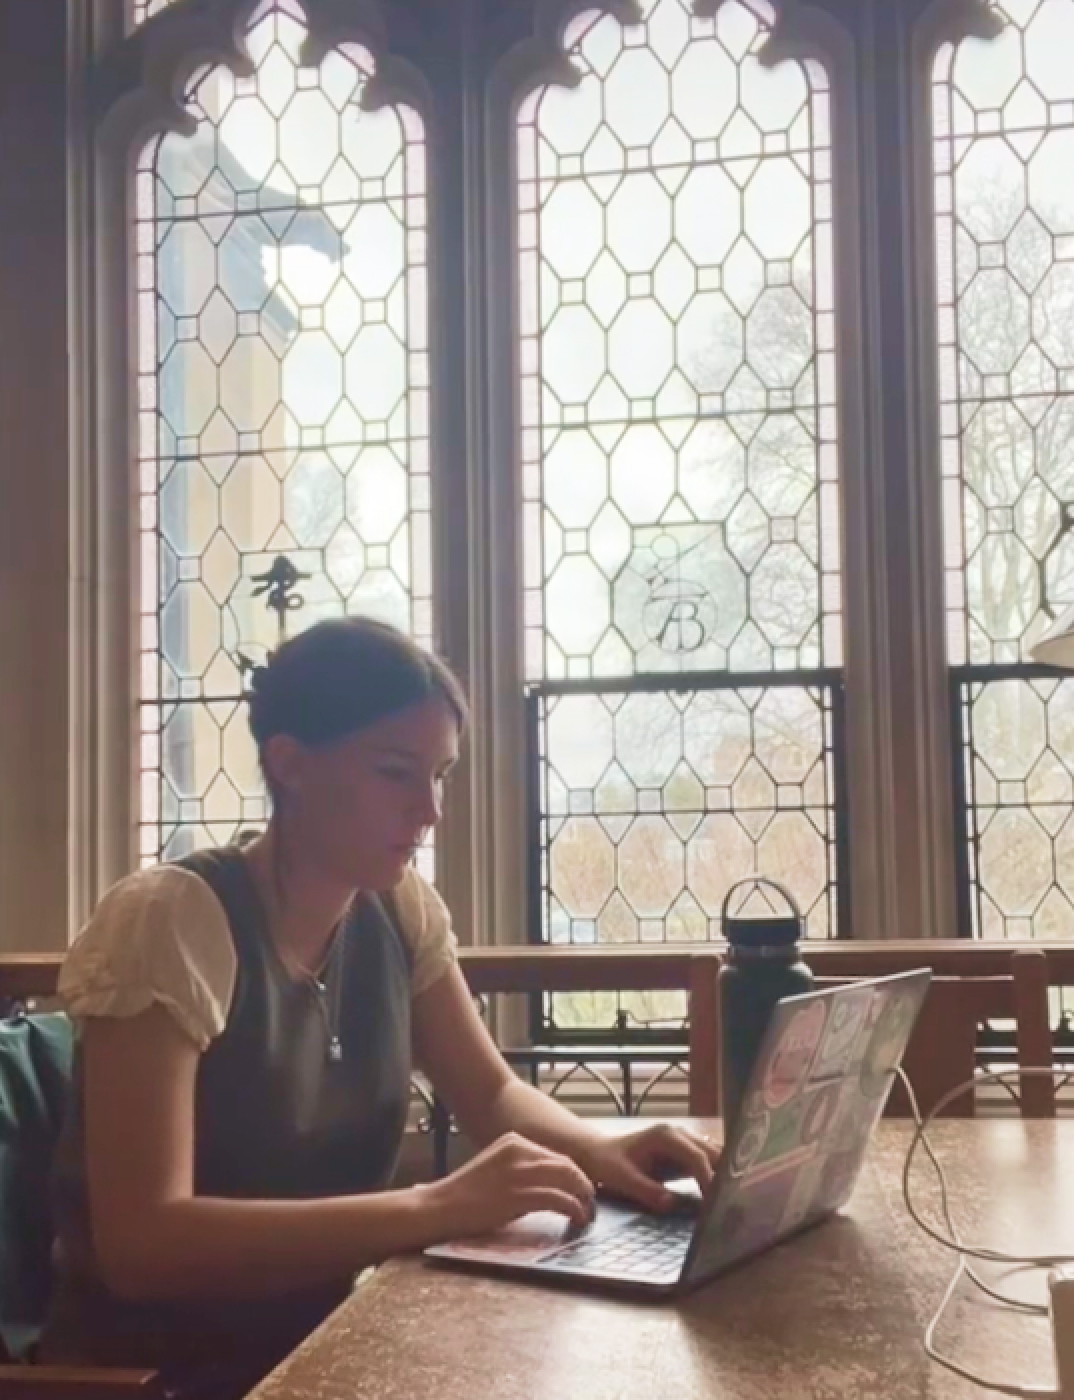 Student working on a laptop in front of a window